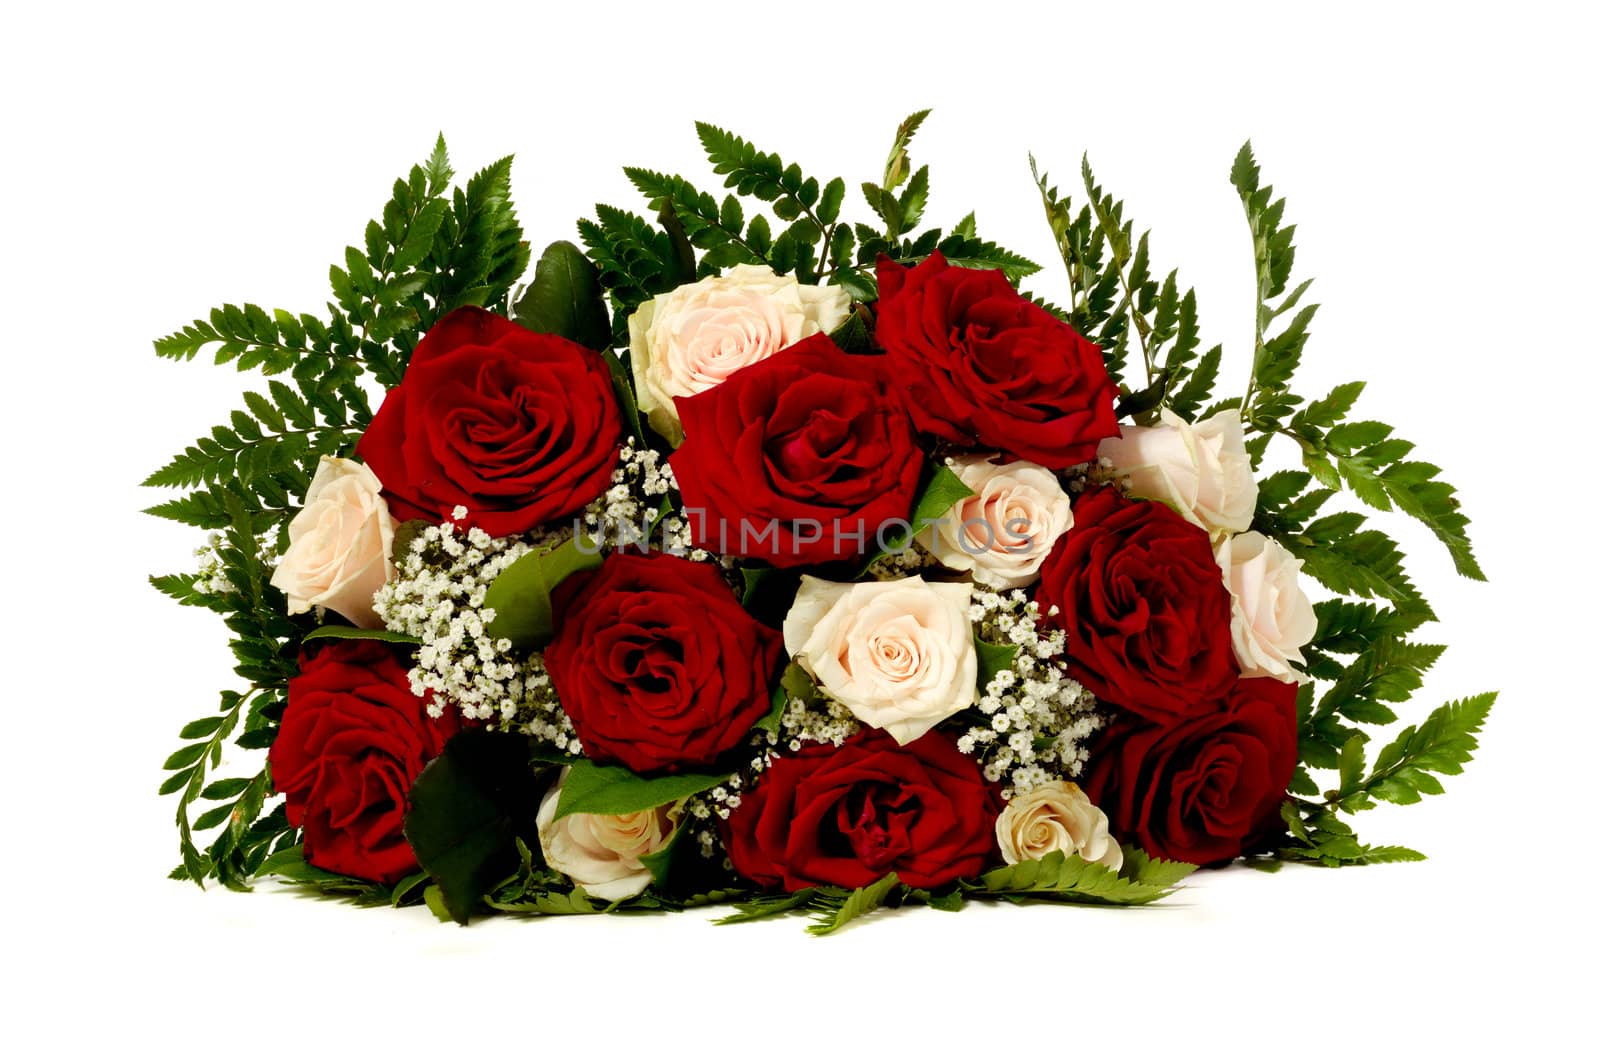 Bouquet of red and pink rose flowers, taken on a clean white backround.